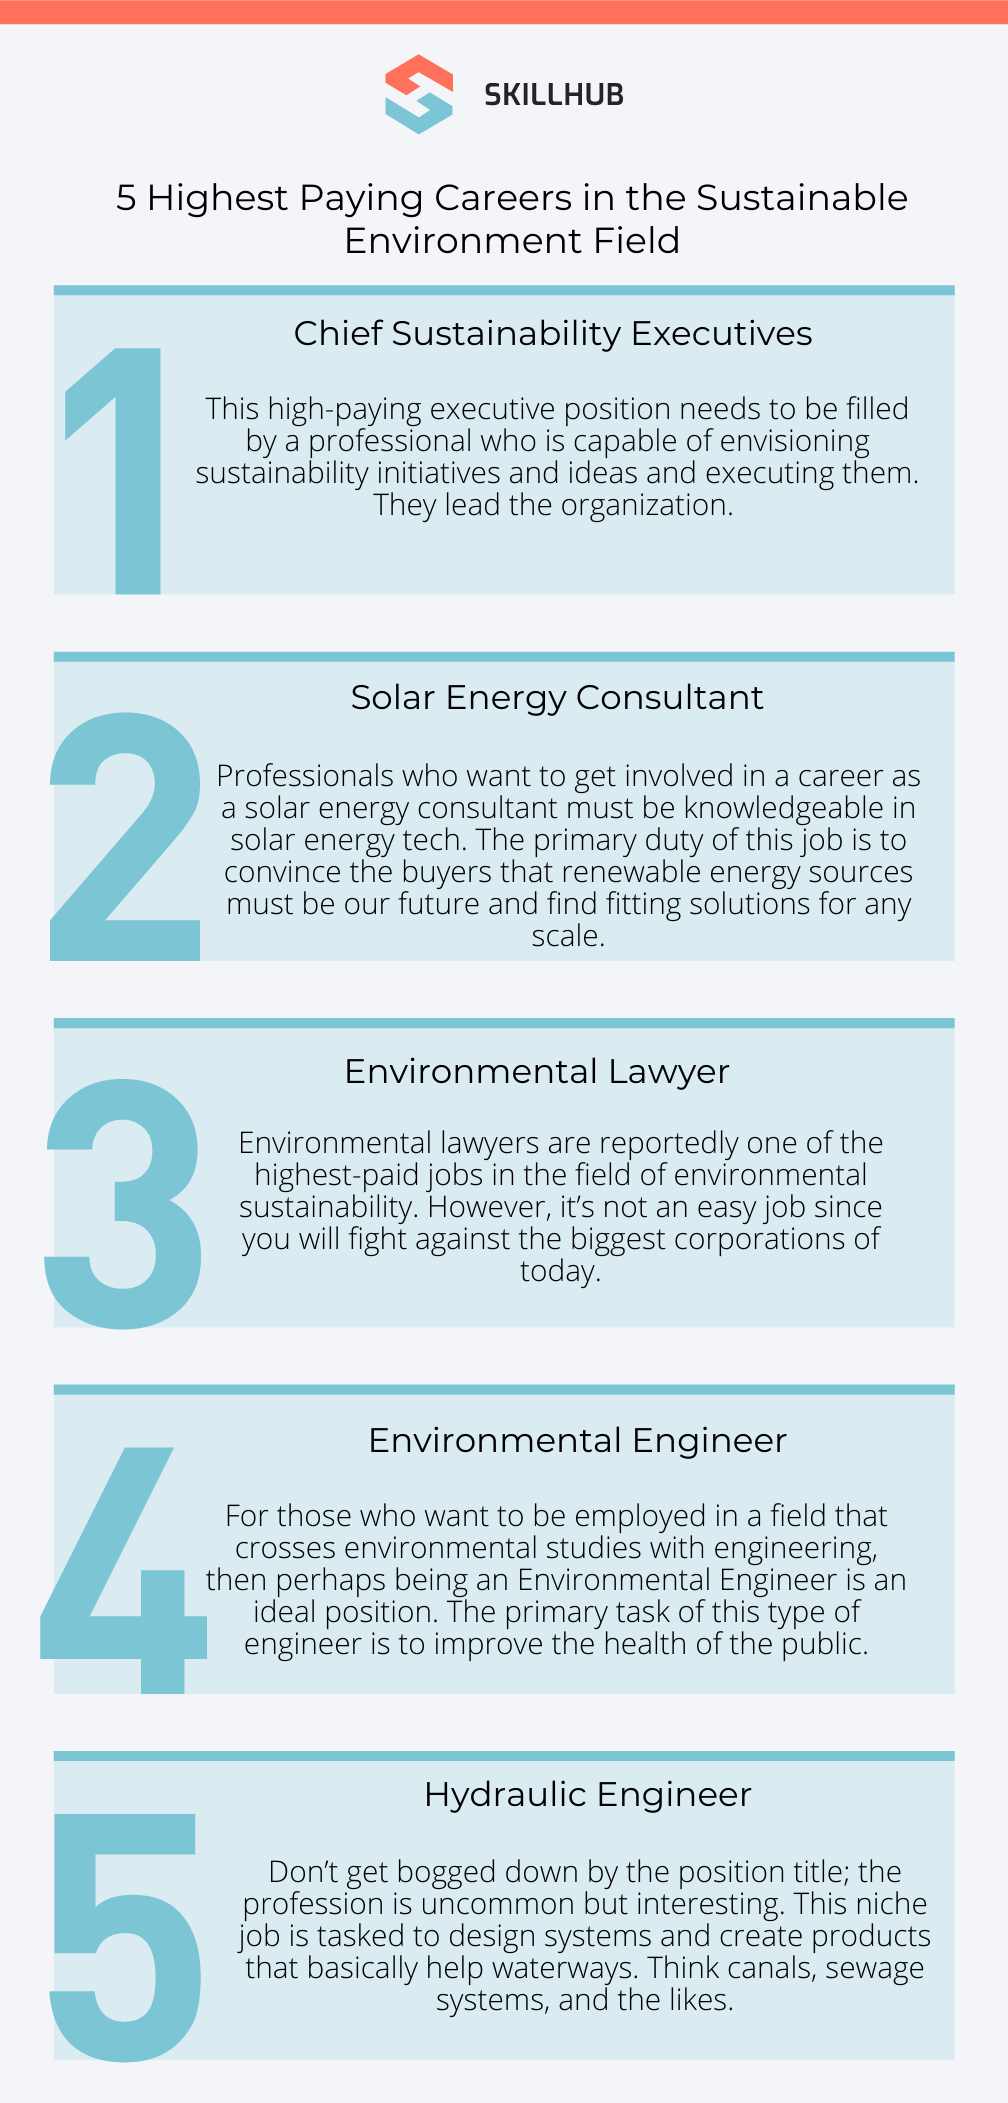 5 Highest Paying Careers in the Sustainable Environment Field